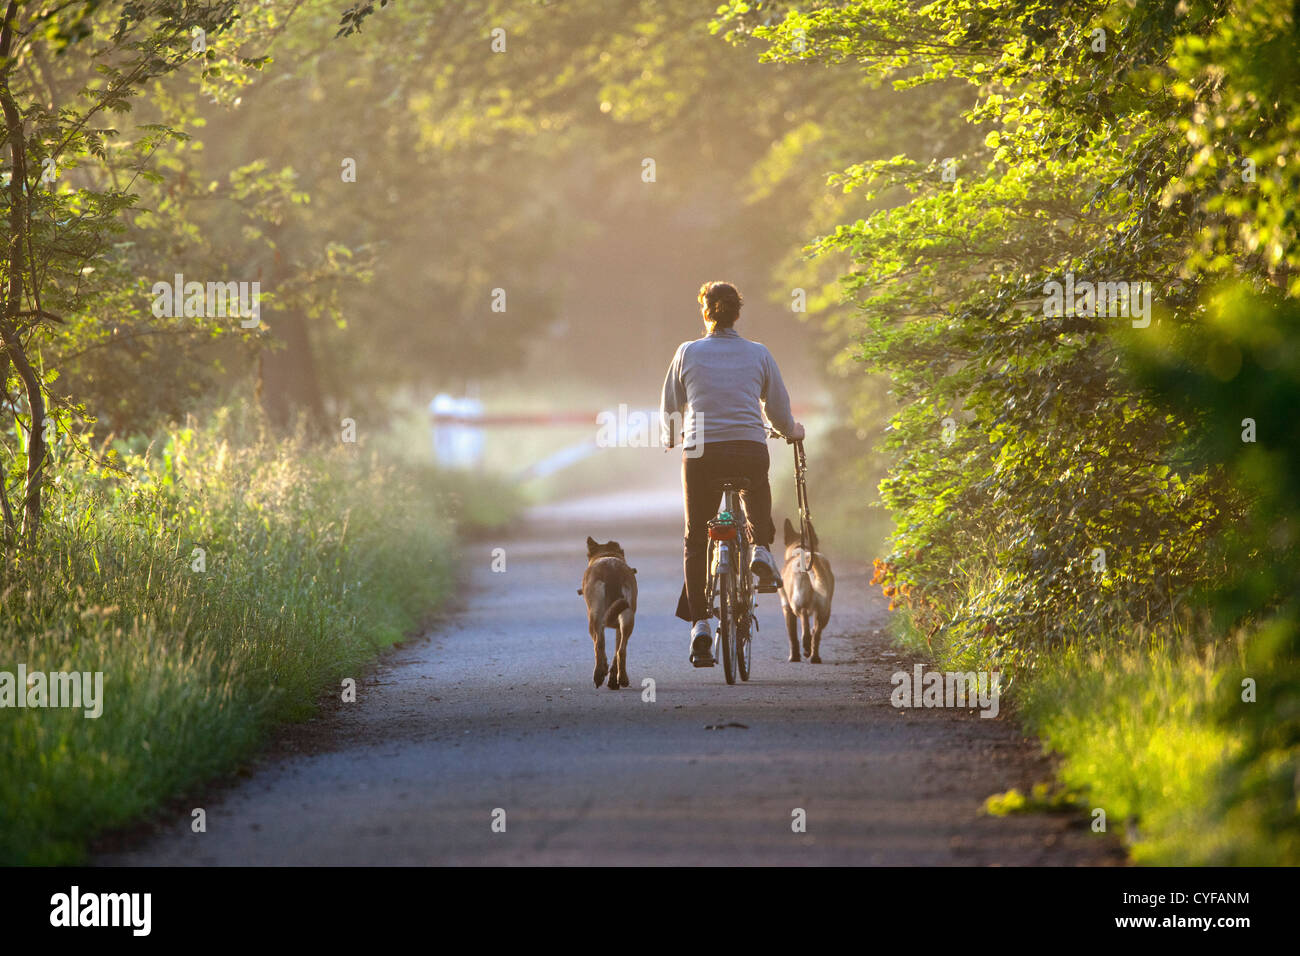 The Netherlands, 's-Graveland, Woman on bicycle and with dogs in the rural estate area called Spanderswoud. Stock Photo